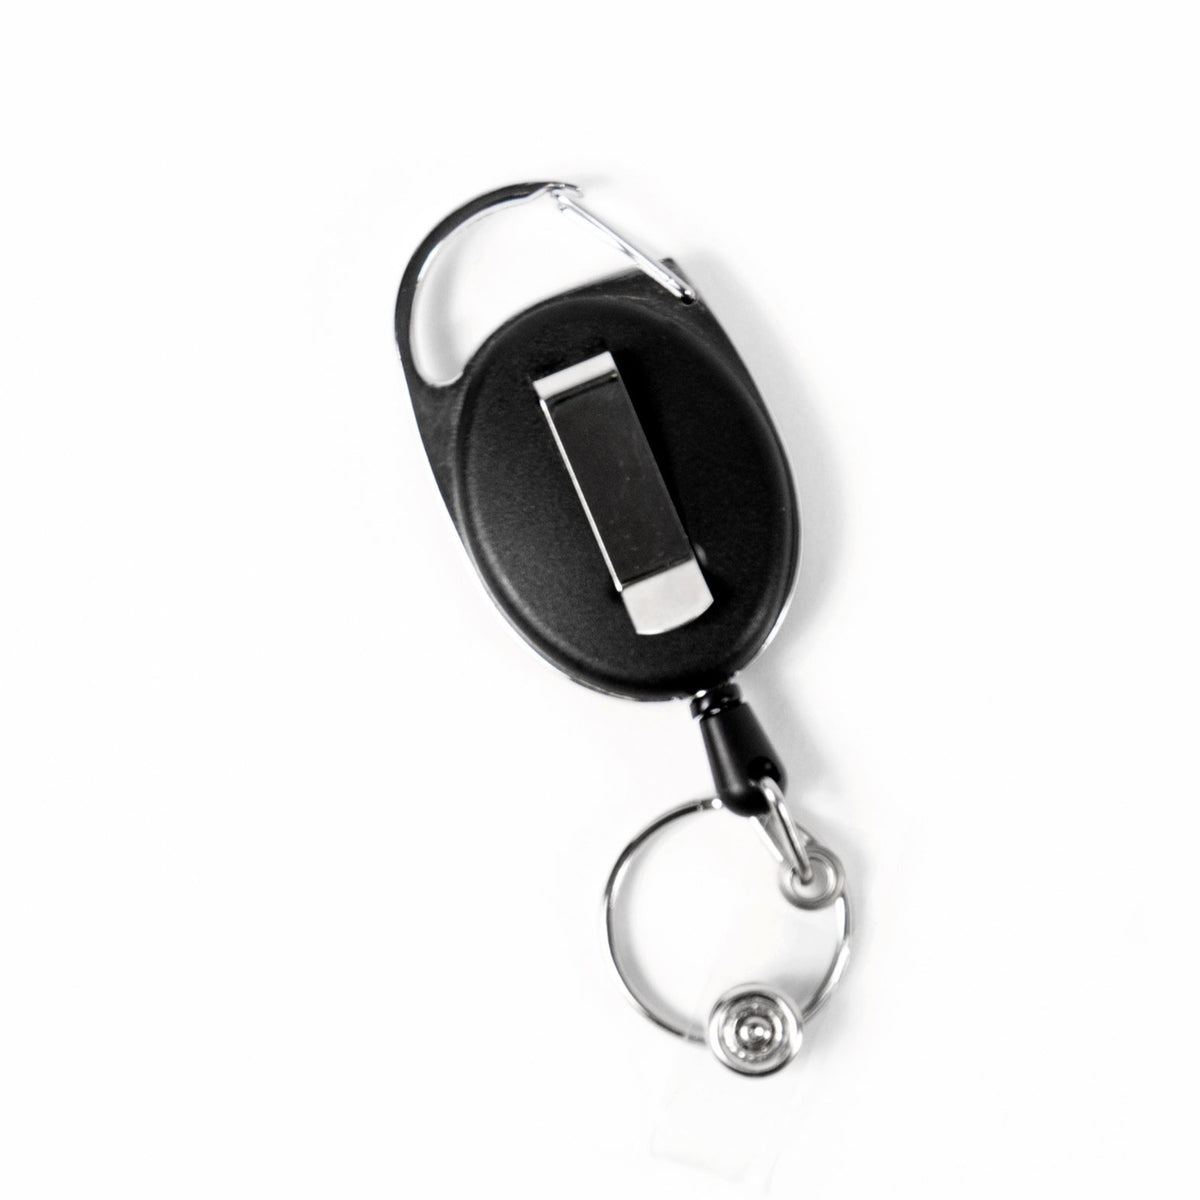 Retractable Key Ring Carabineer with Belt Clip